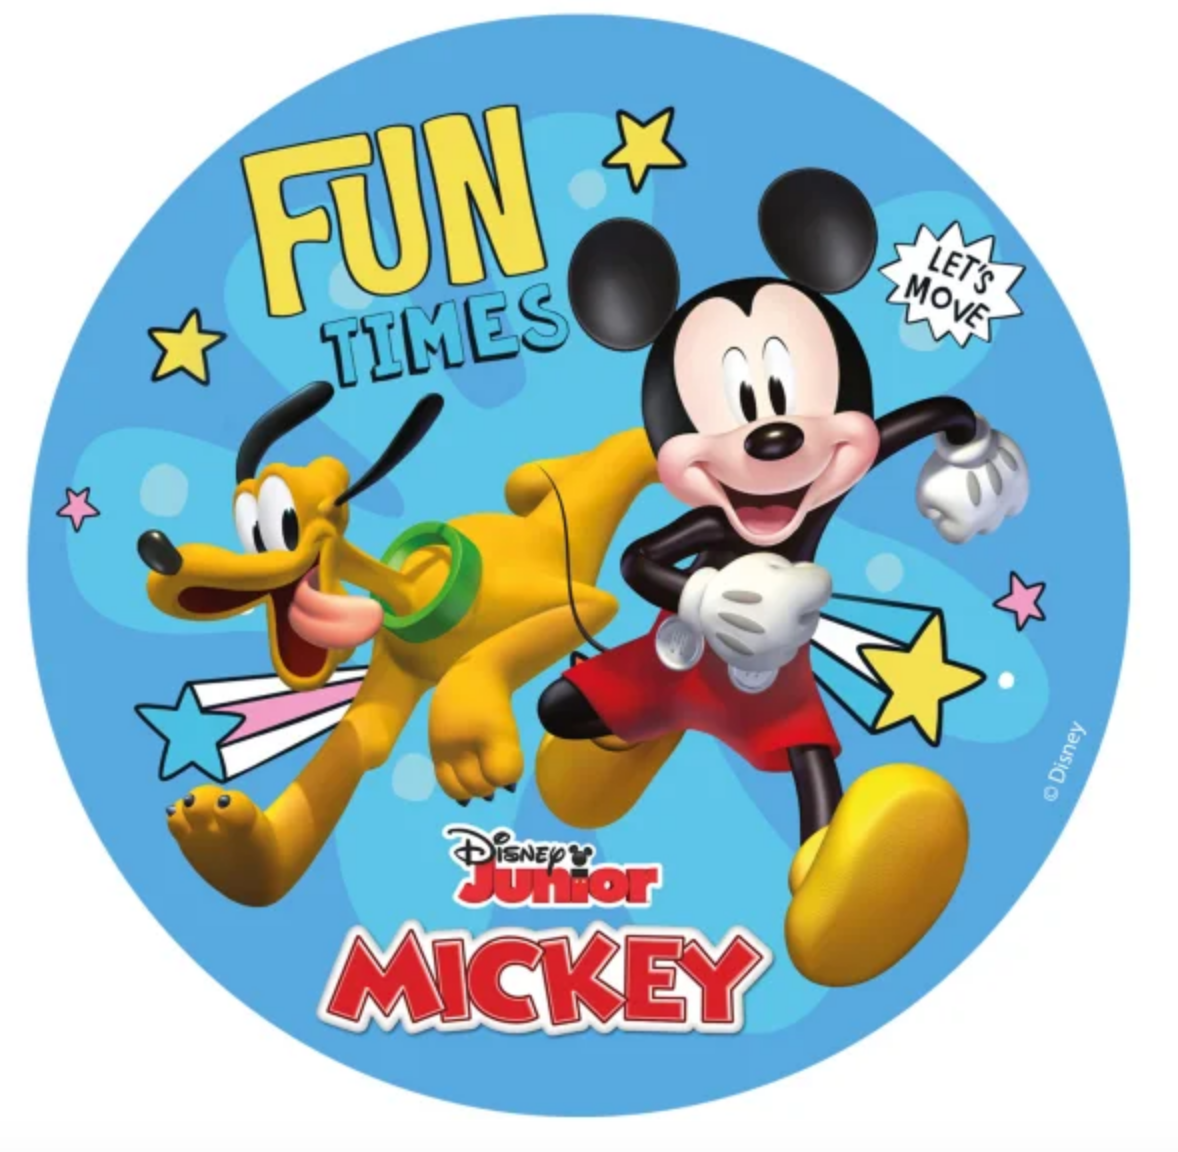 Mickey Mouse med Pluto kageprint - Mickey Mouse kageprint